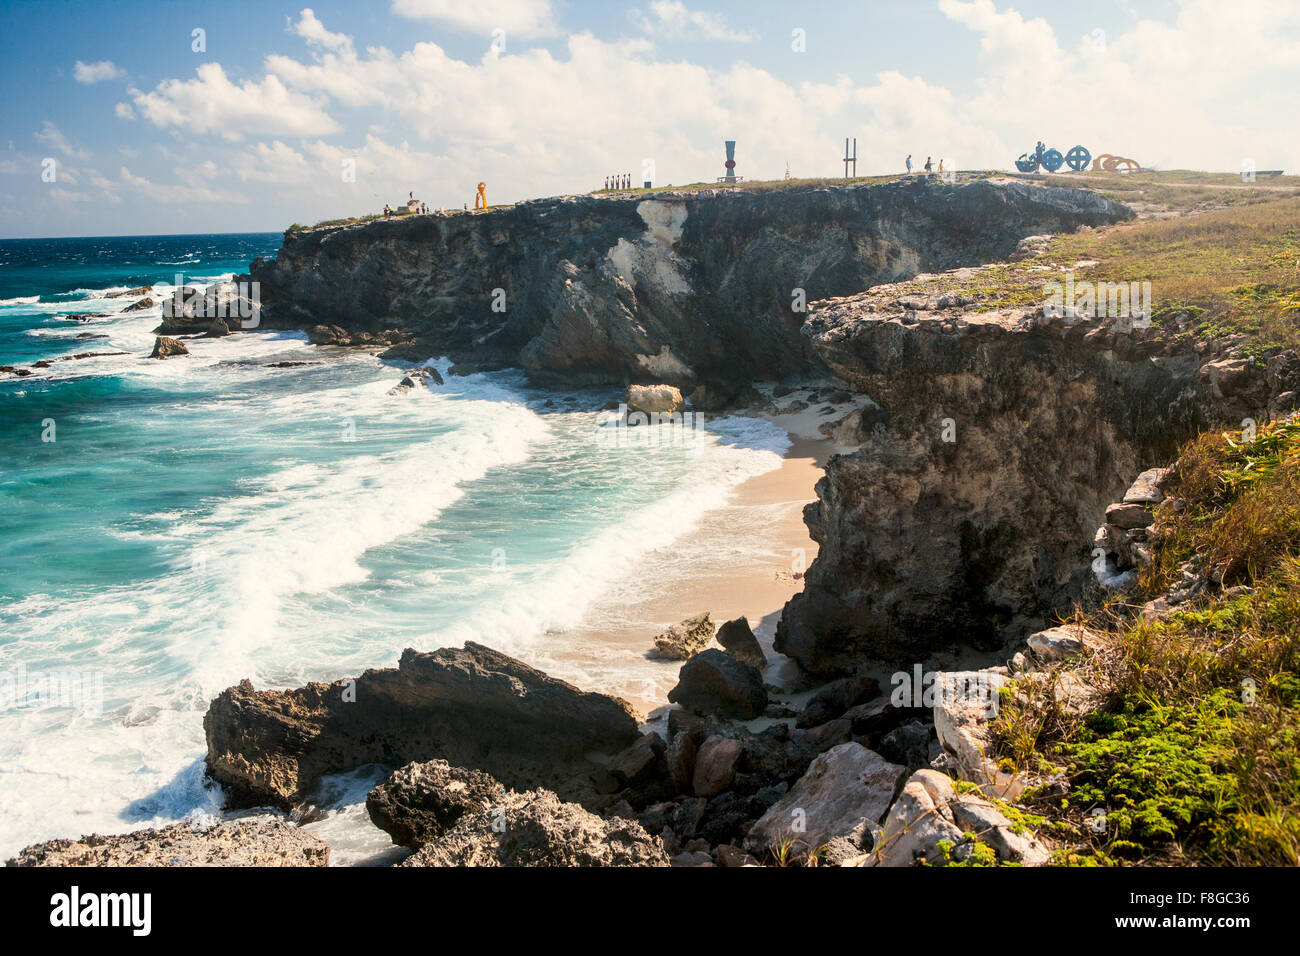 The cliffs of Punta Sur, Isla Mujeres, Mexico Stock Photo